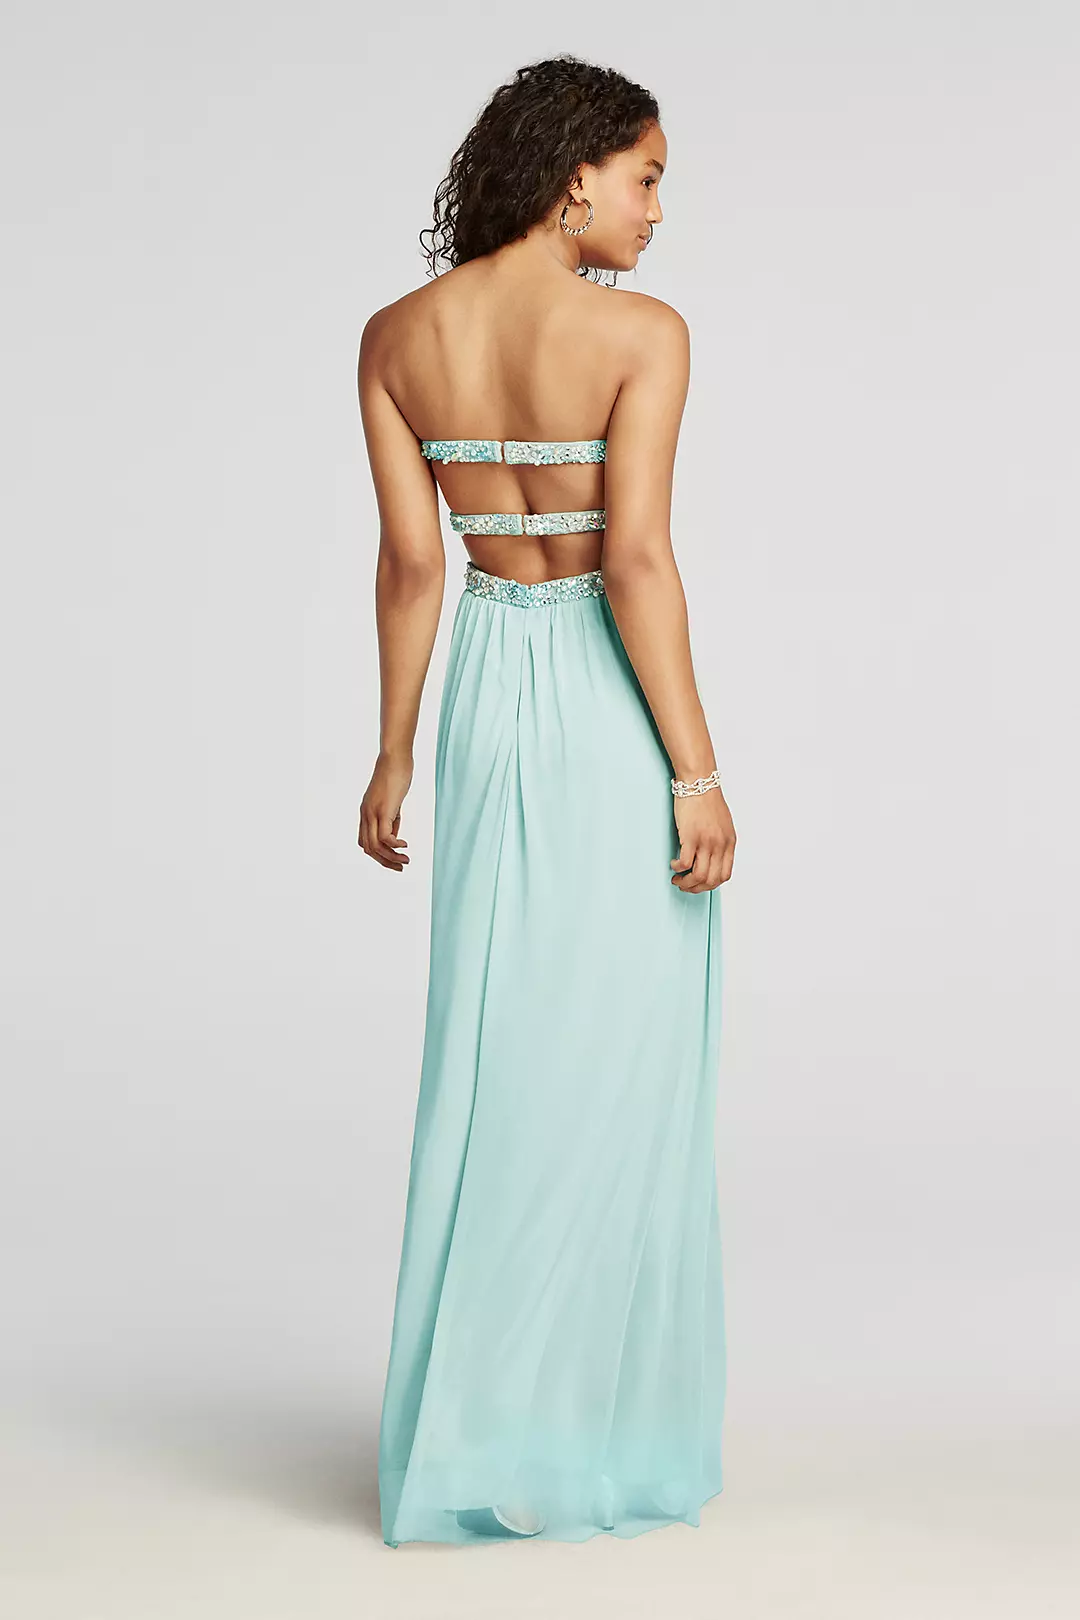 Strapless Crystal Beaded Cut Out Prom Dress Image 2